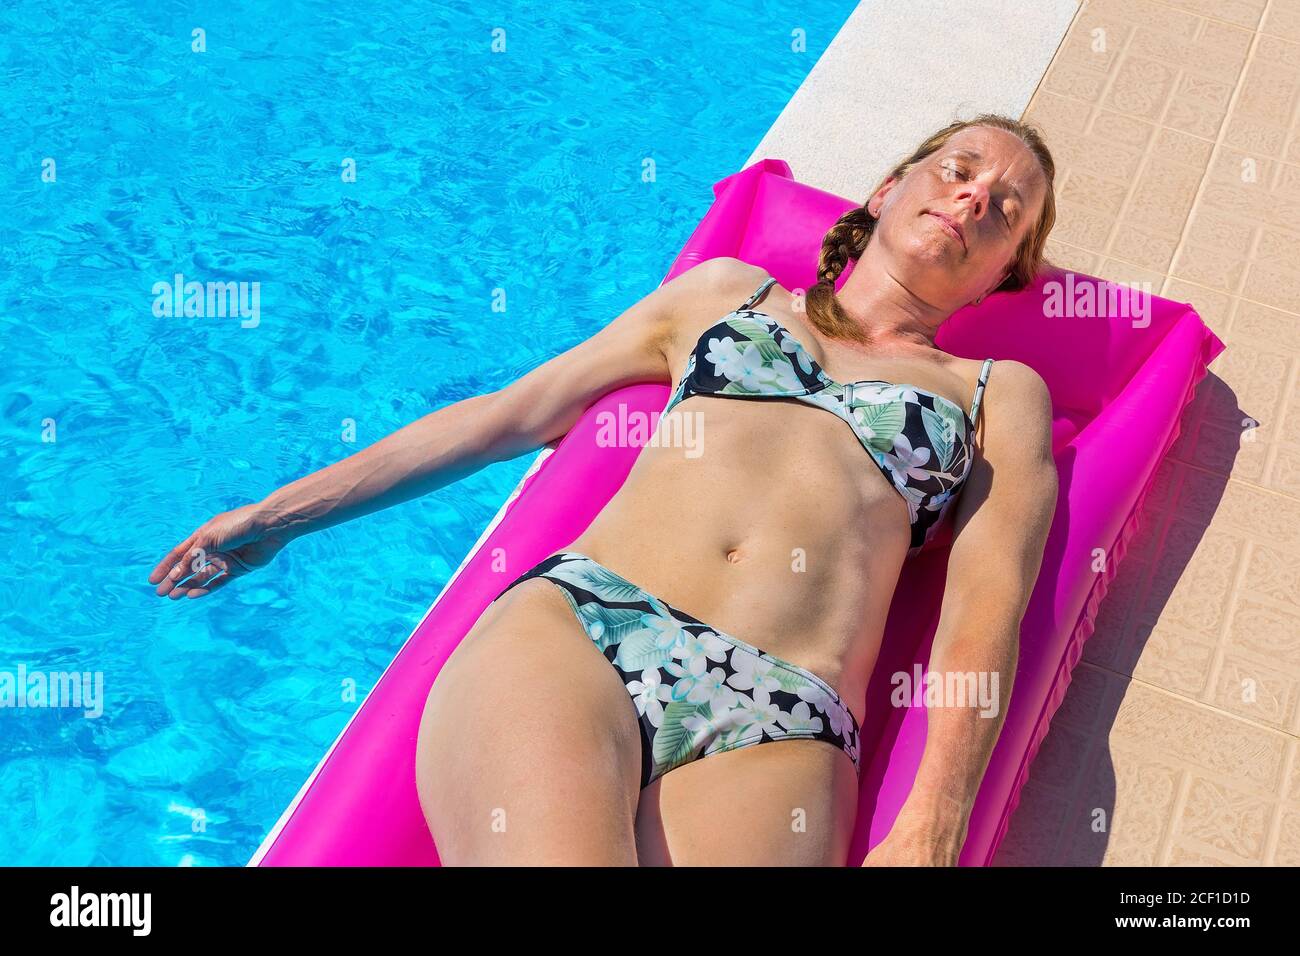 Middle aged european woman lying on air mattress sunbathing at swimming pool Stock Photo